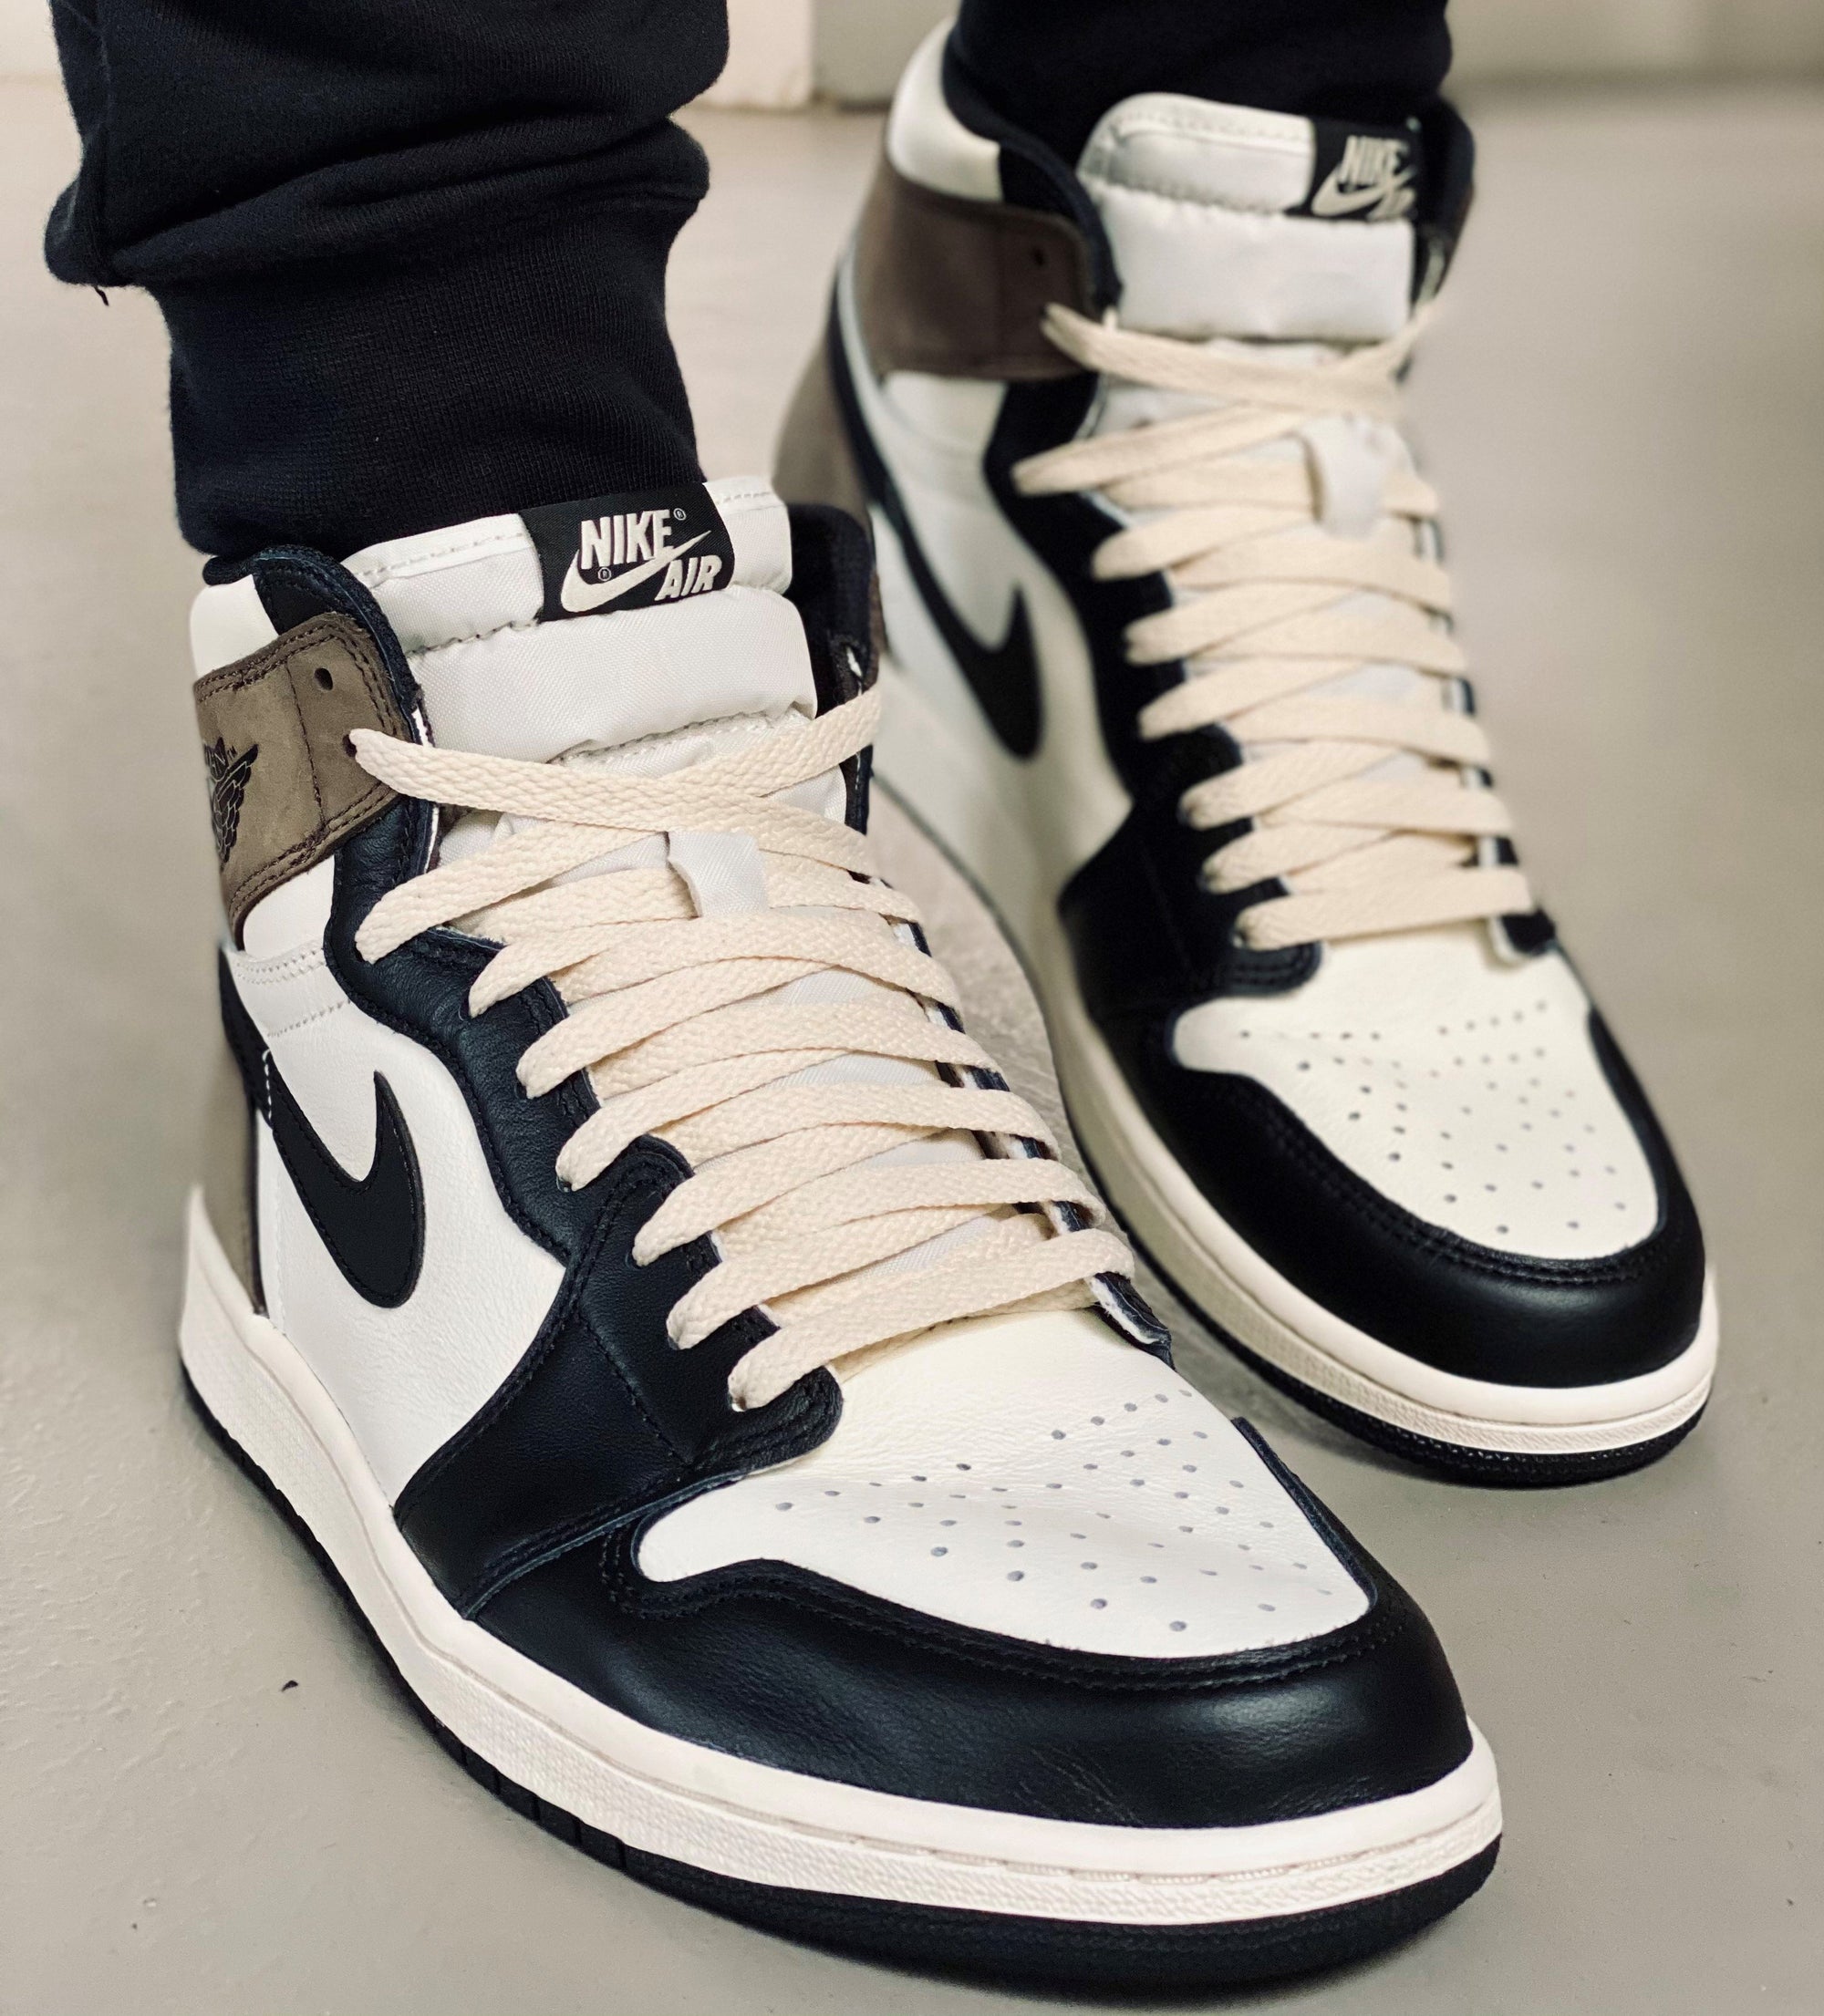 how to lace high jordan 1